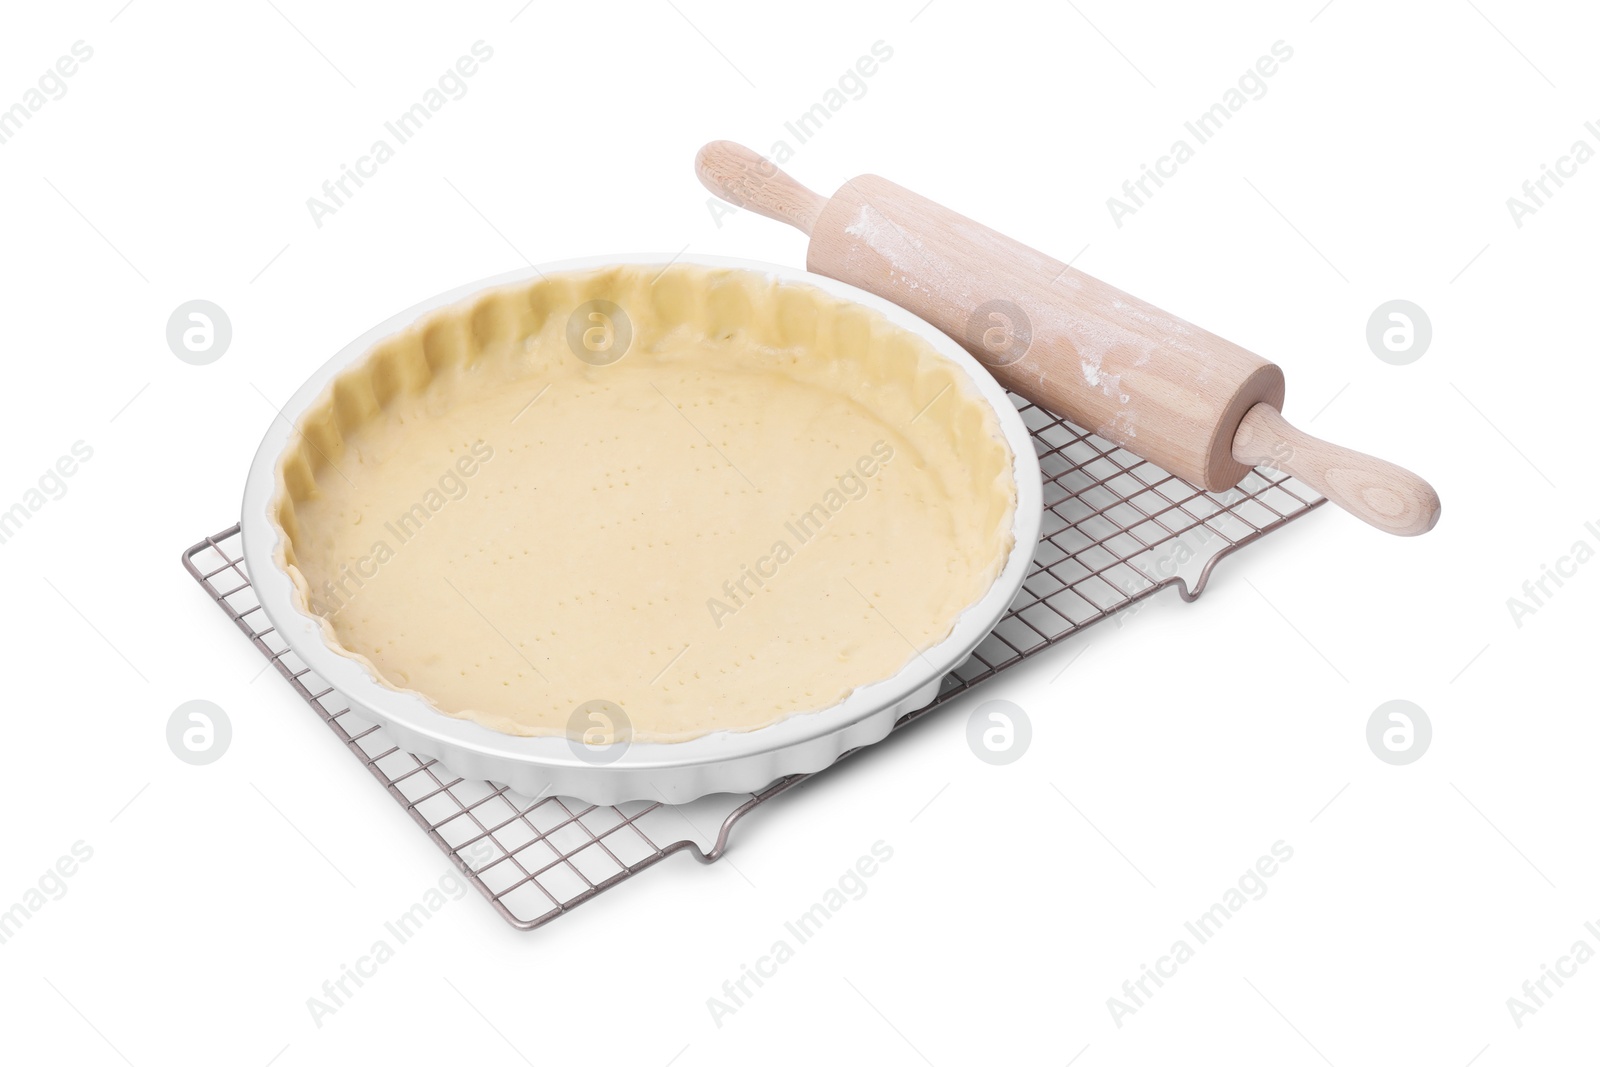 Photo of Quiche pan with fresh dough and rolling pin isolated on white